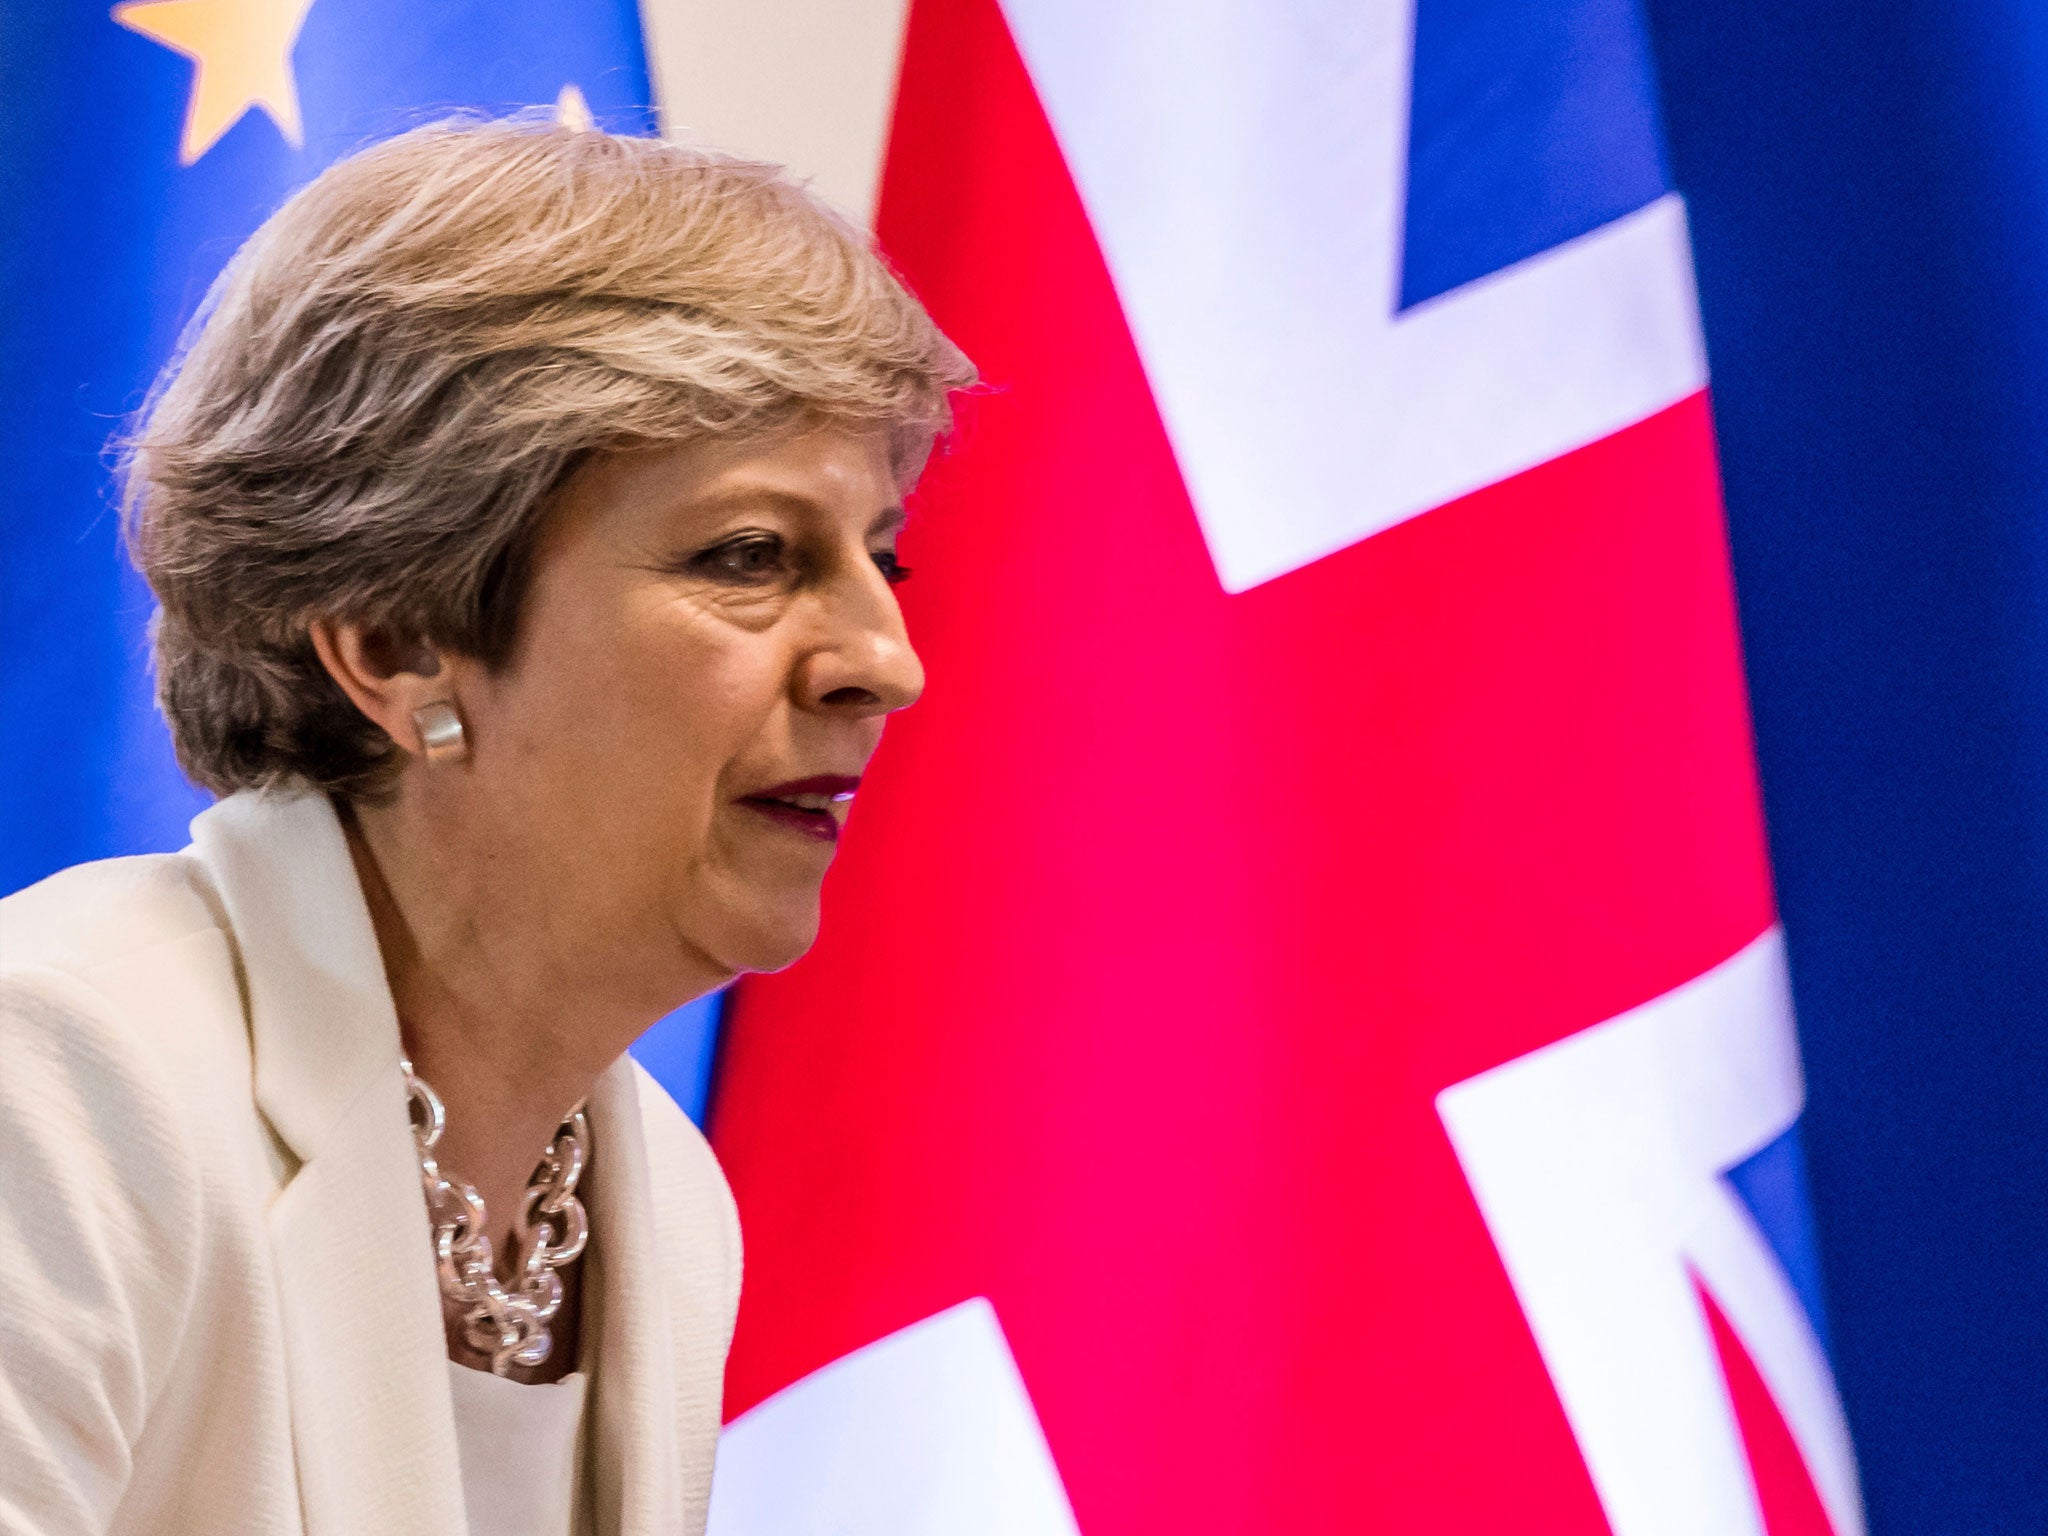 Theresa May insists Britain will leave the EEA automatically when it leaves the EU